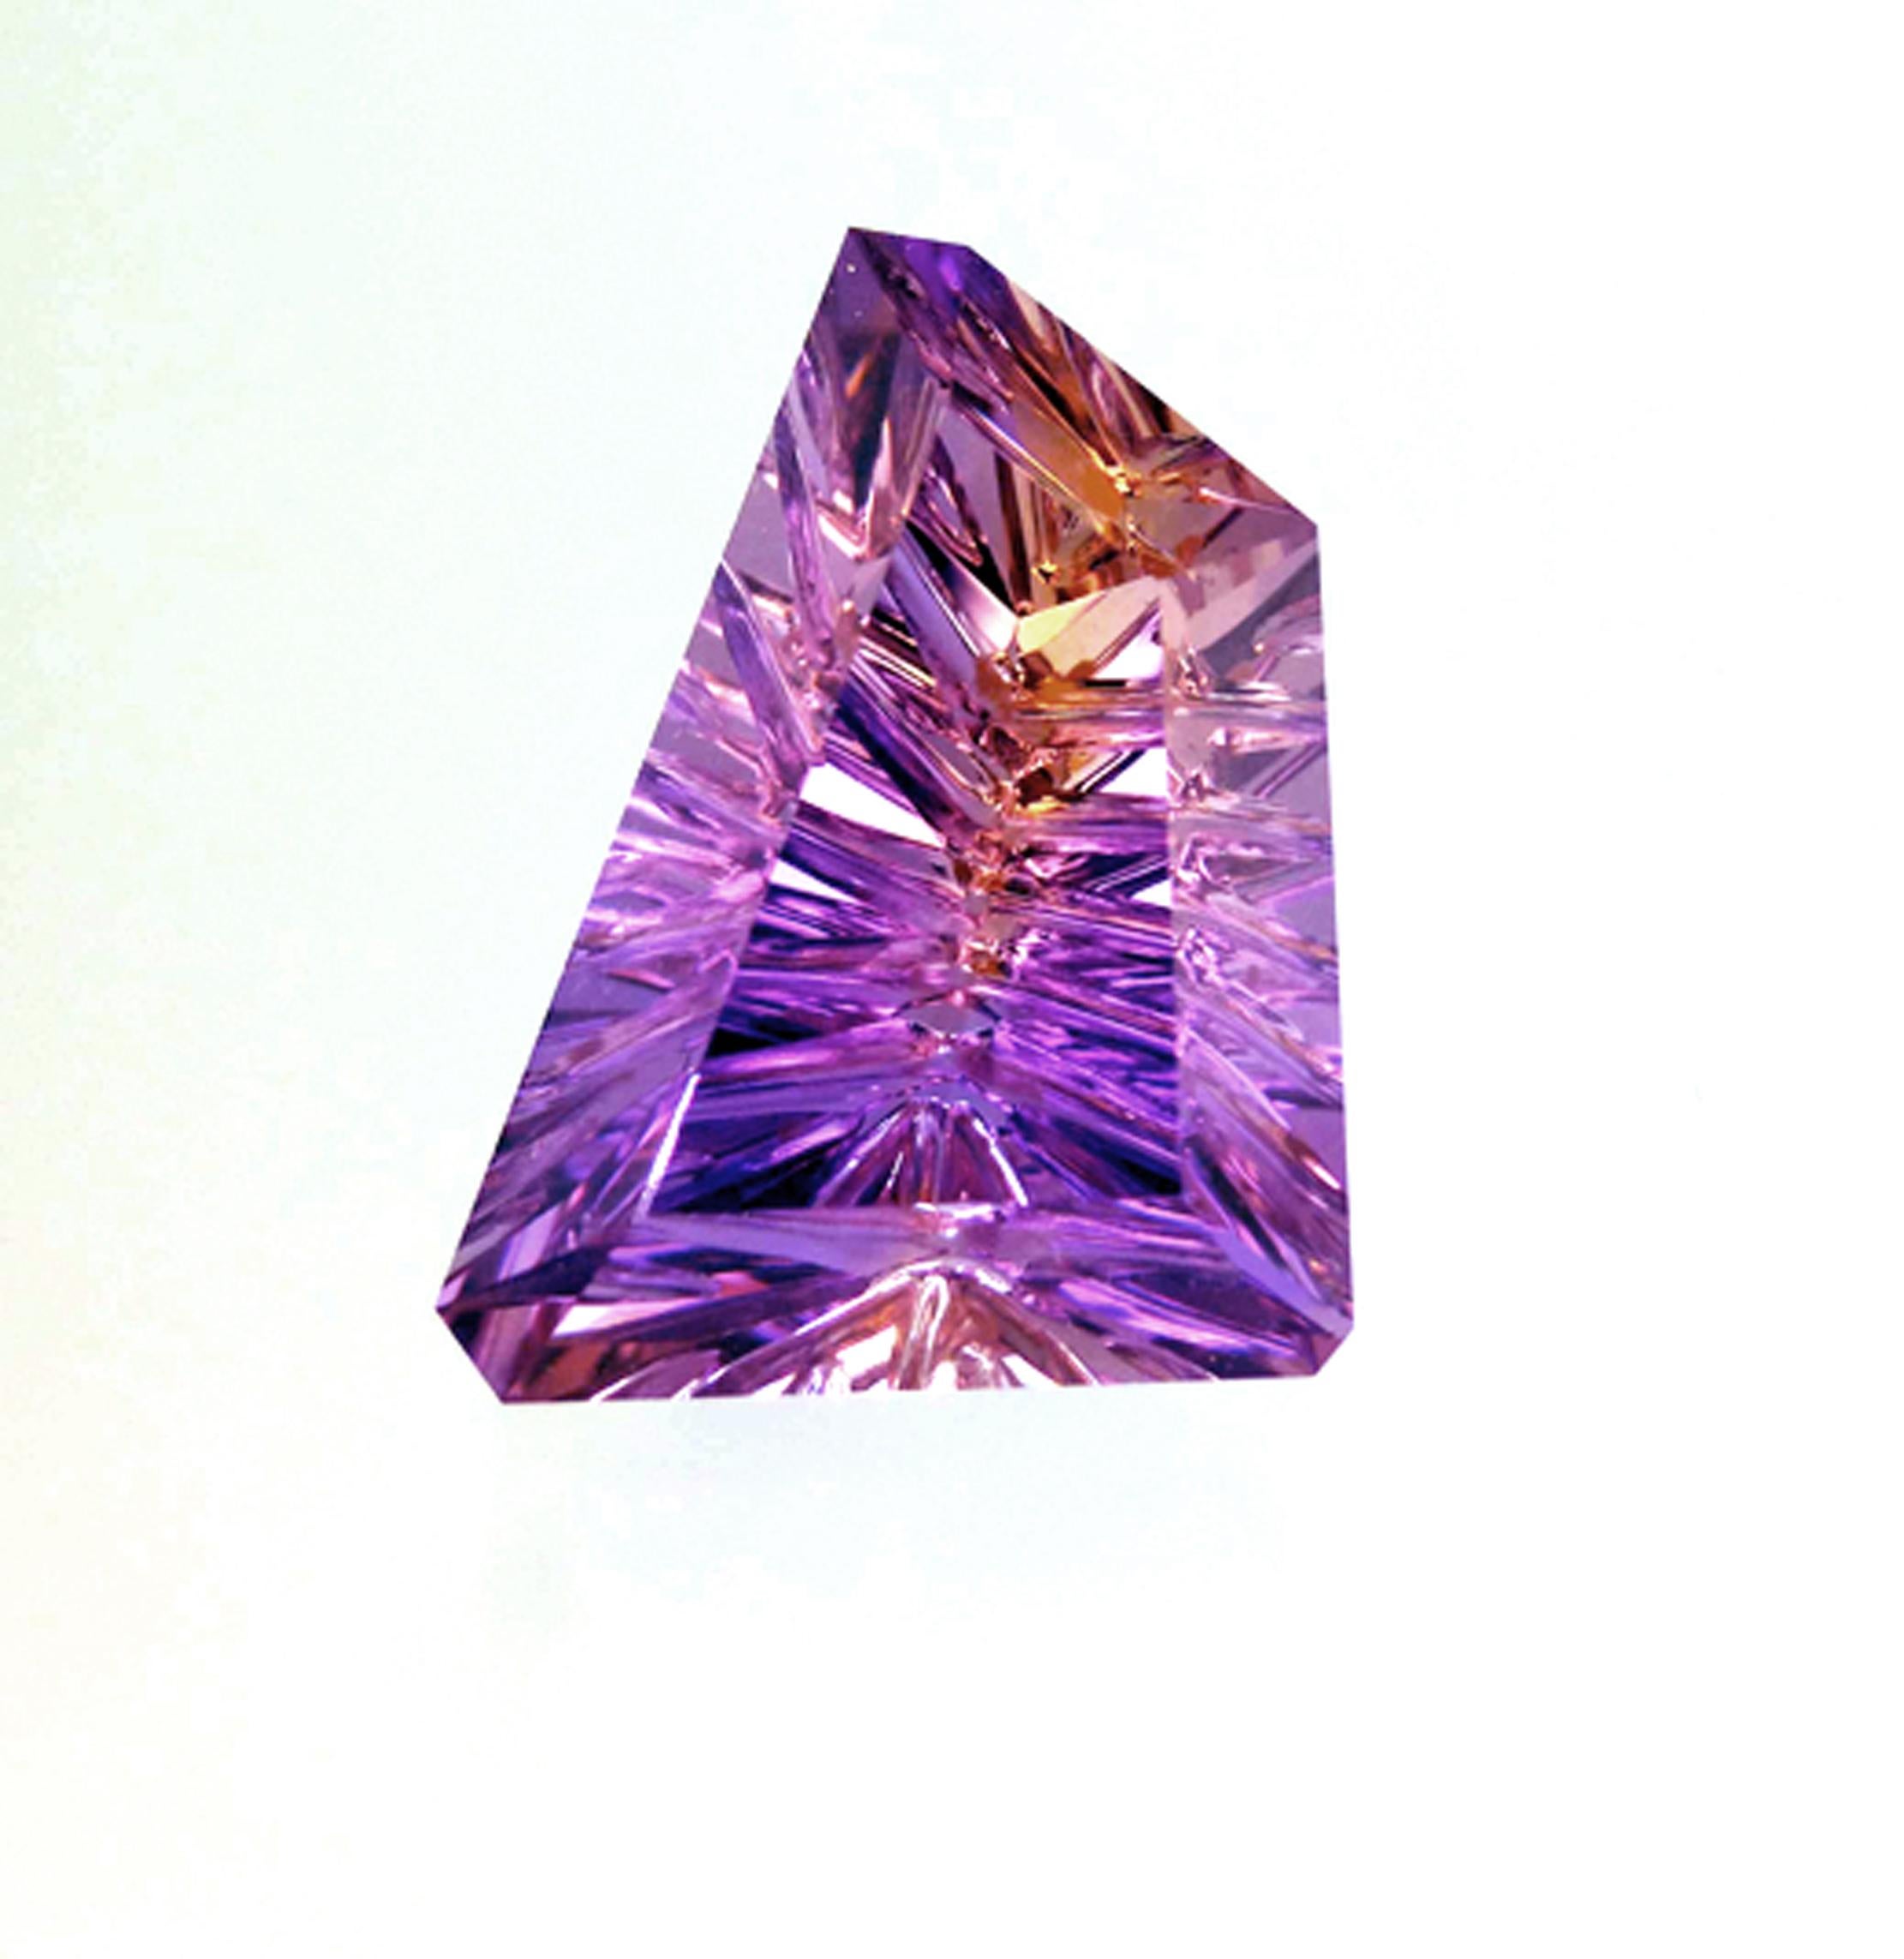 New Lower Price....

A Freeform Hand Grooved Ametrine weighing 31.00ct, faceted by our U.S. cutting specialist from carefully chosen blended amethyst and citrine rough. We obtain our hand-picked Ametrine rough for All That Glitters directly from the